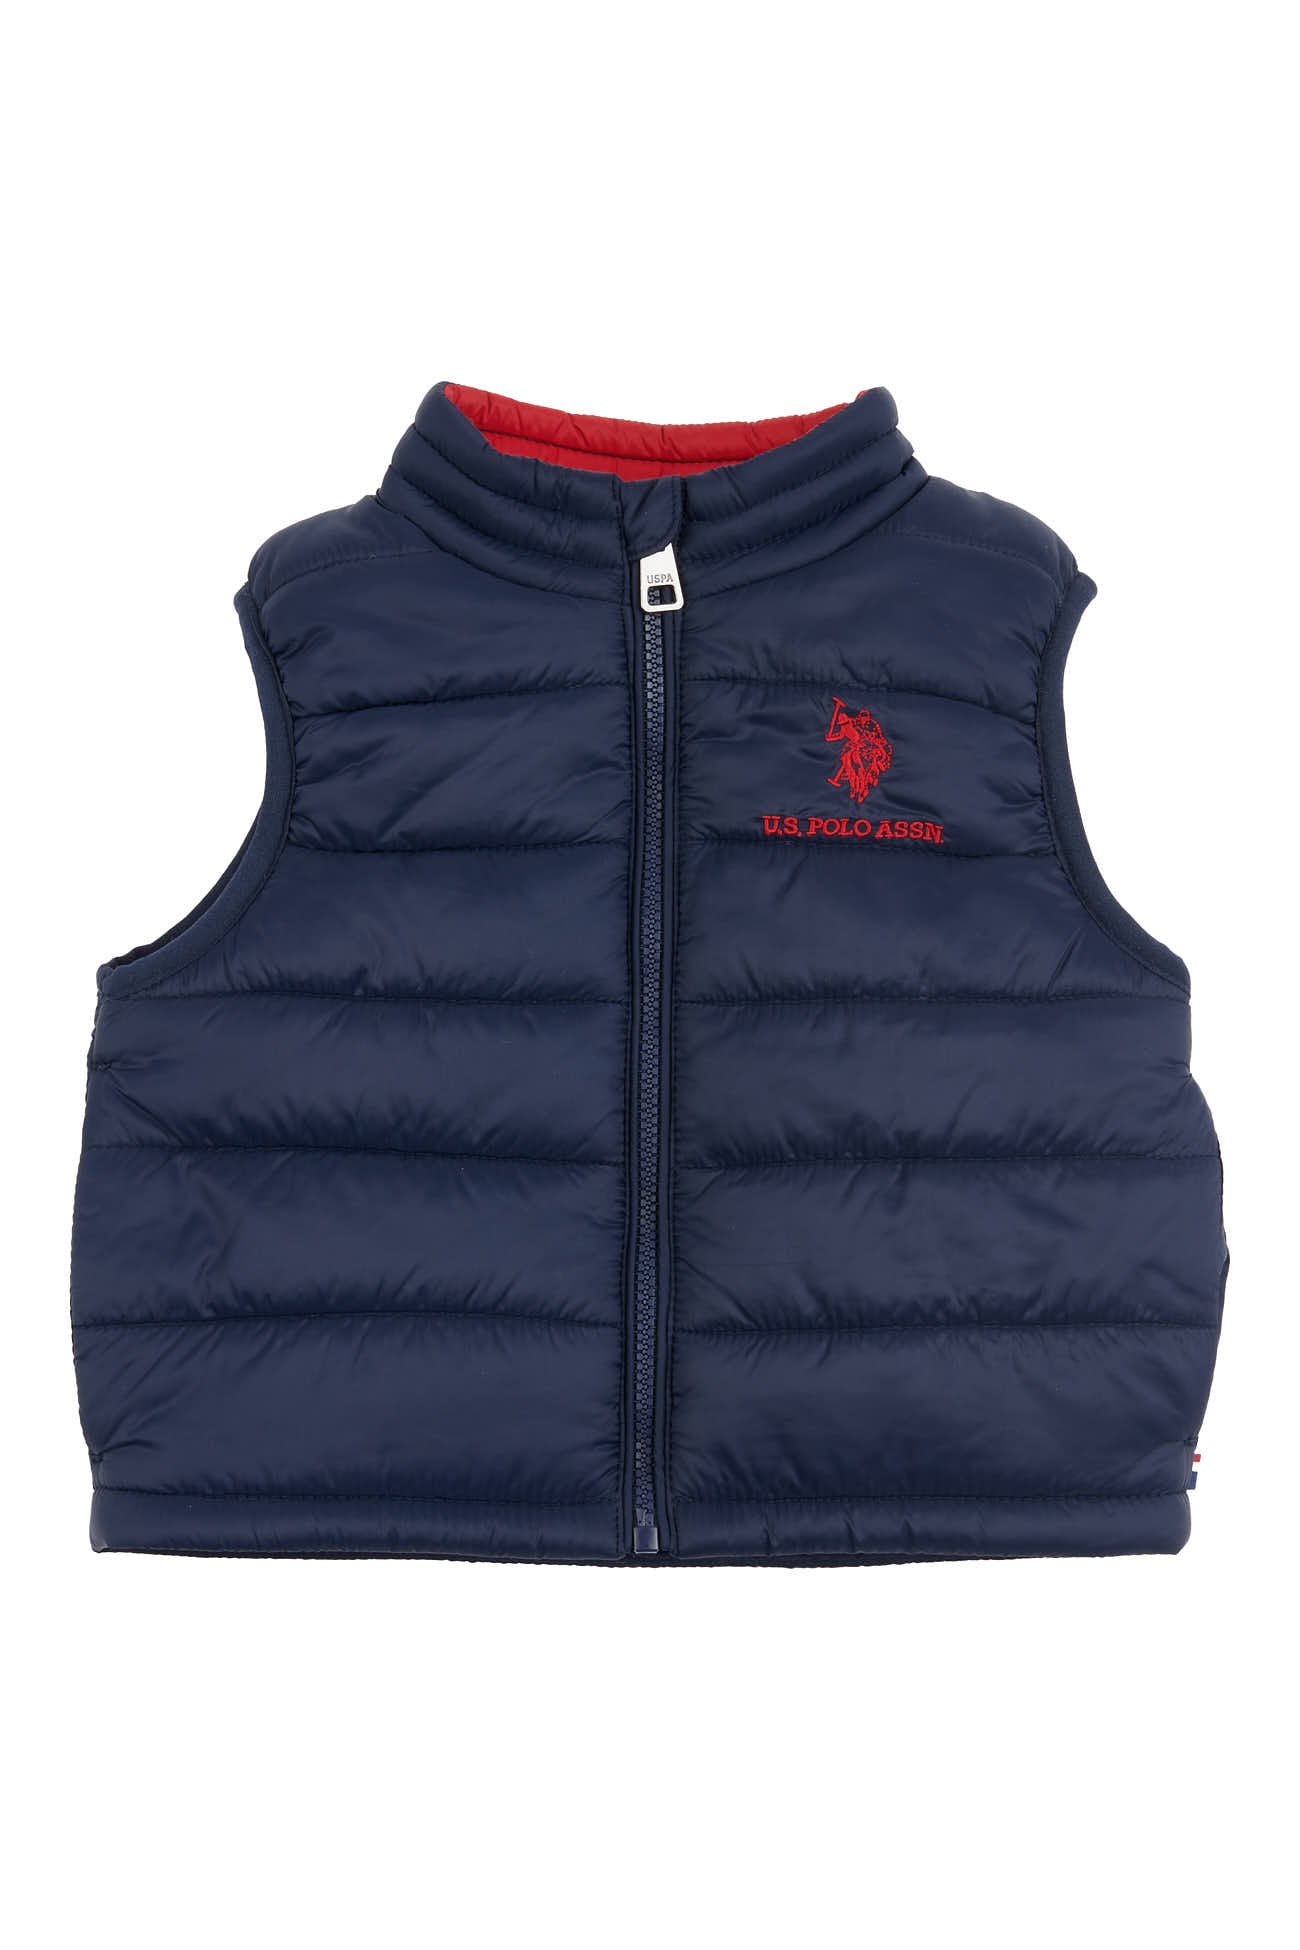 U.S. Polo Assn. Baby Lightweight Quilted Gilet in Navy Blue – U.S. Polo Assn.  UK